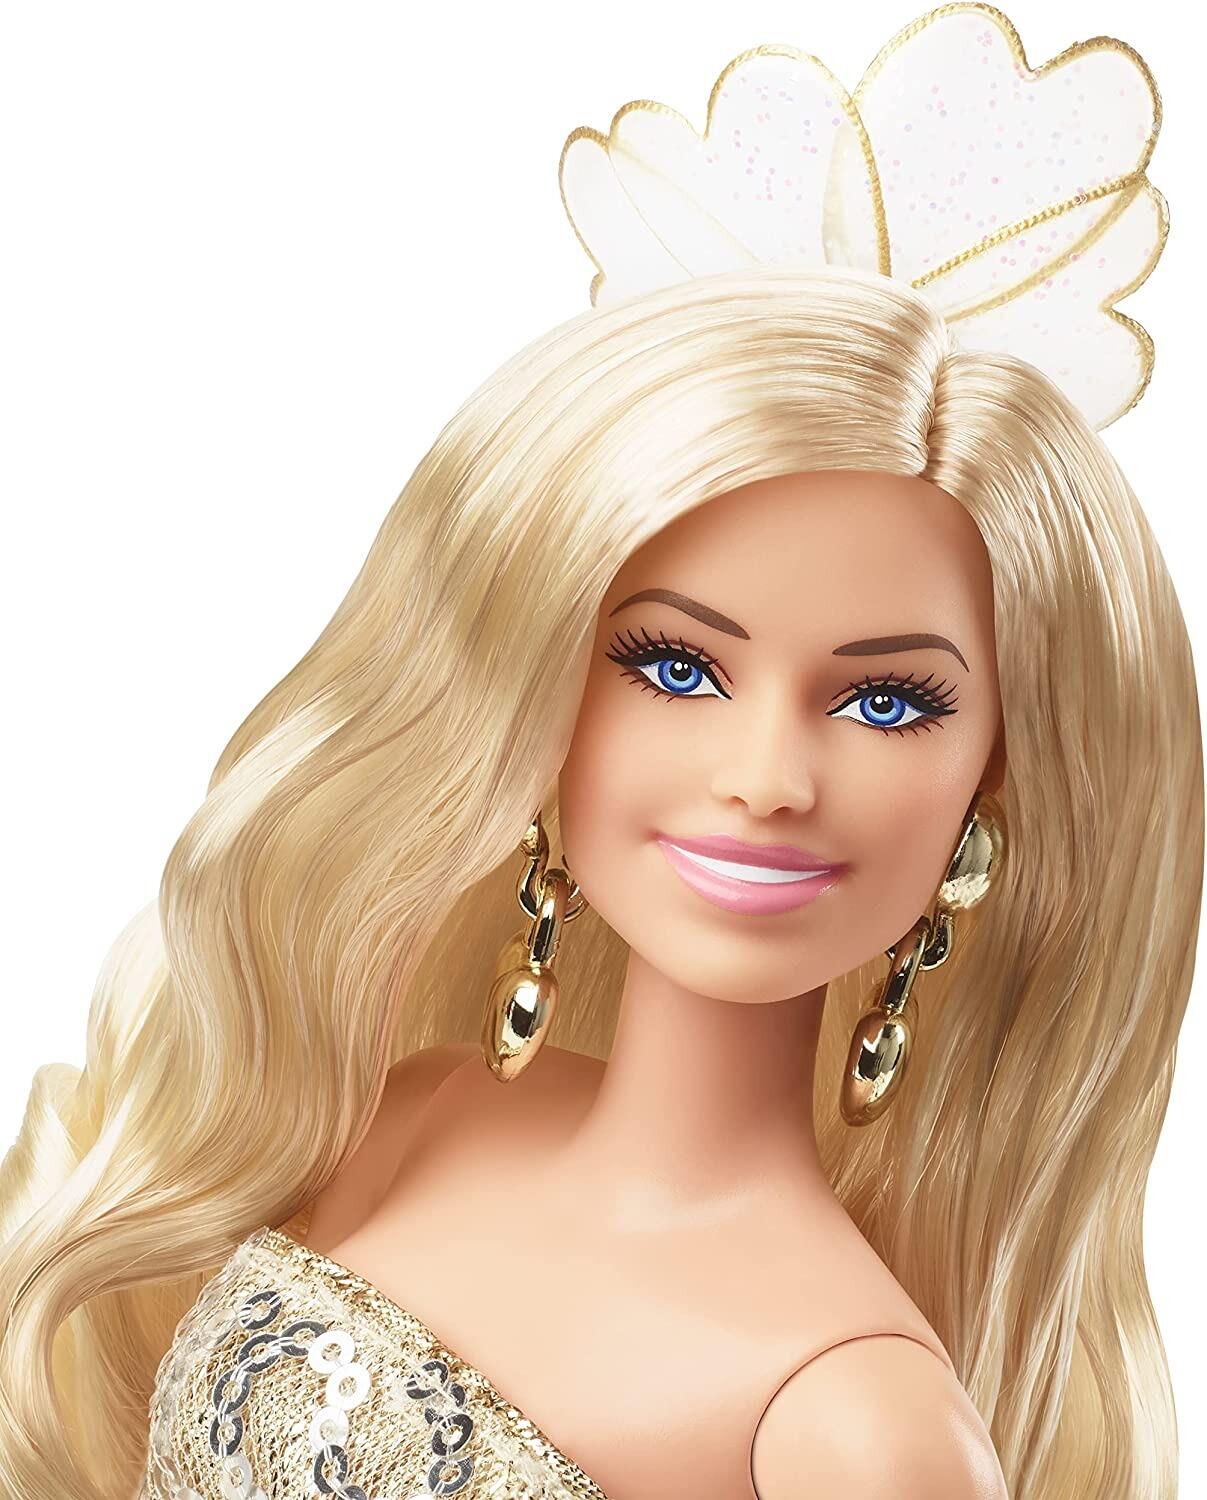 Buy Barbie The Movie Doll, Margot Robbie as Barbie, Collectible Doll Wearing Gold Disco Jumpsuit